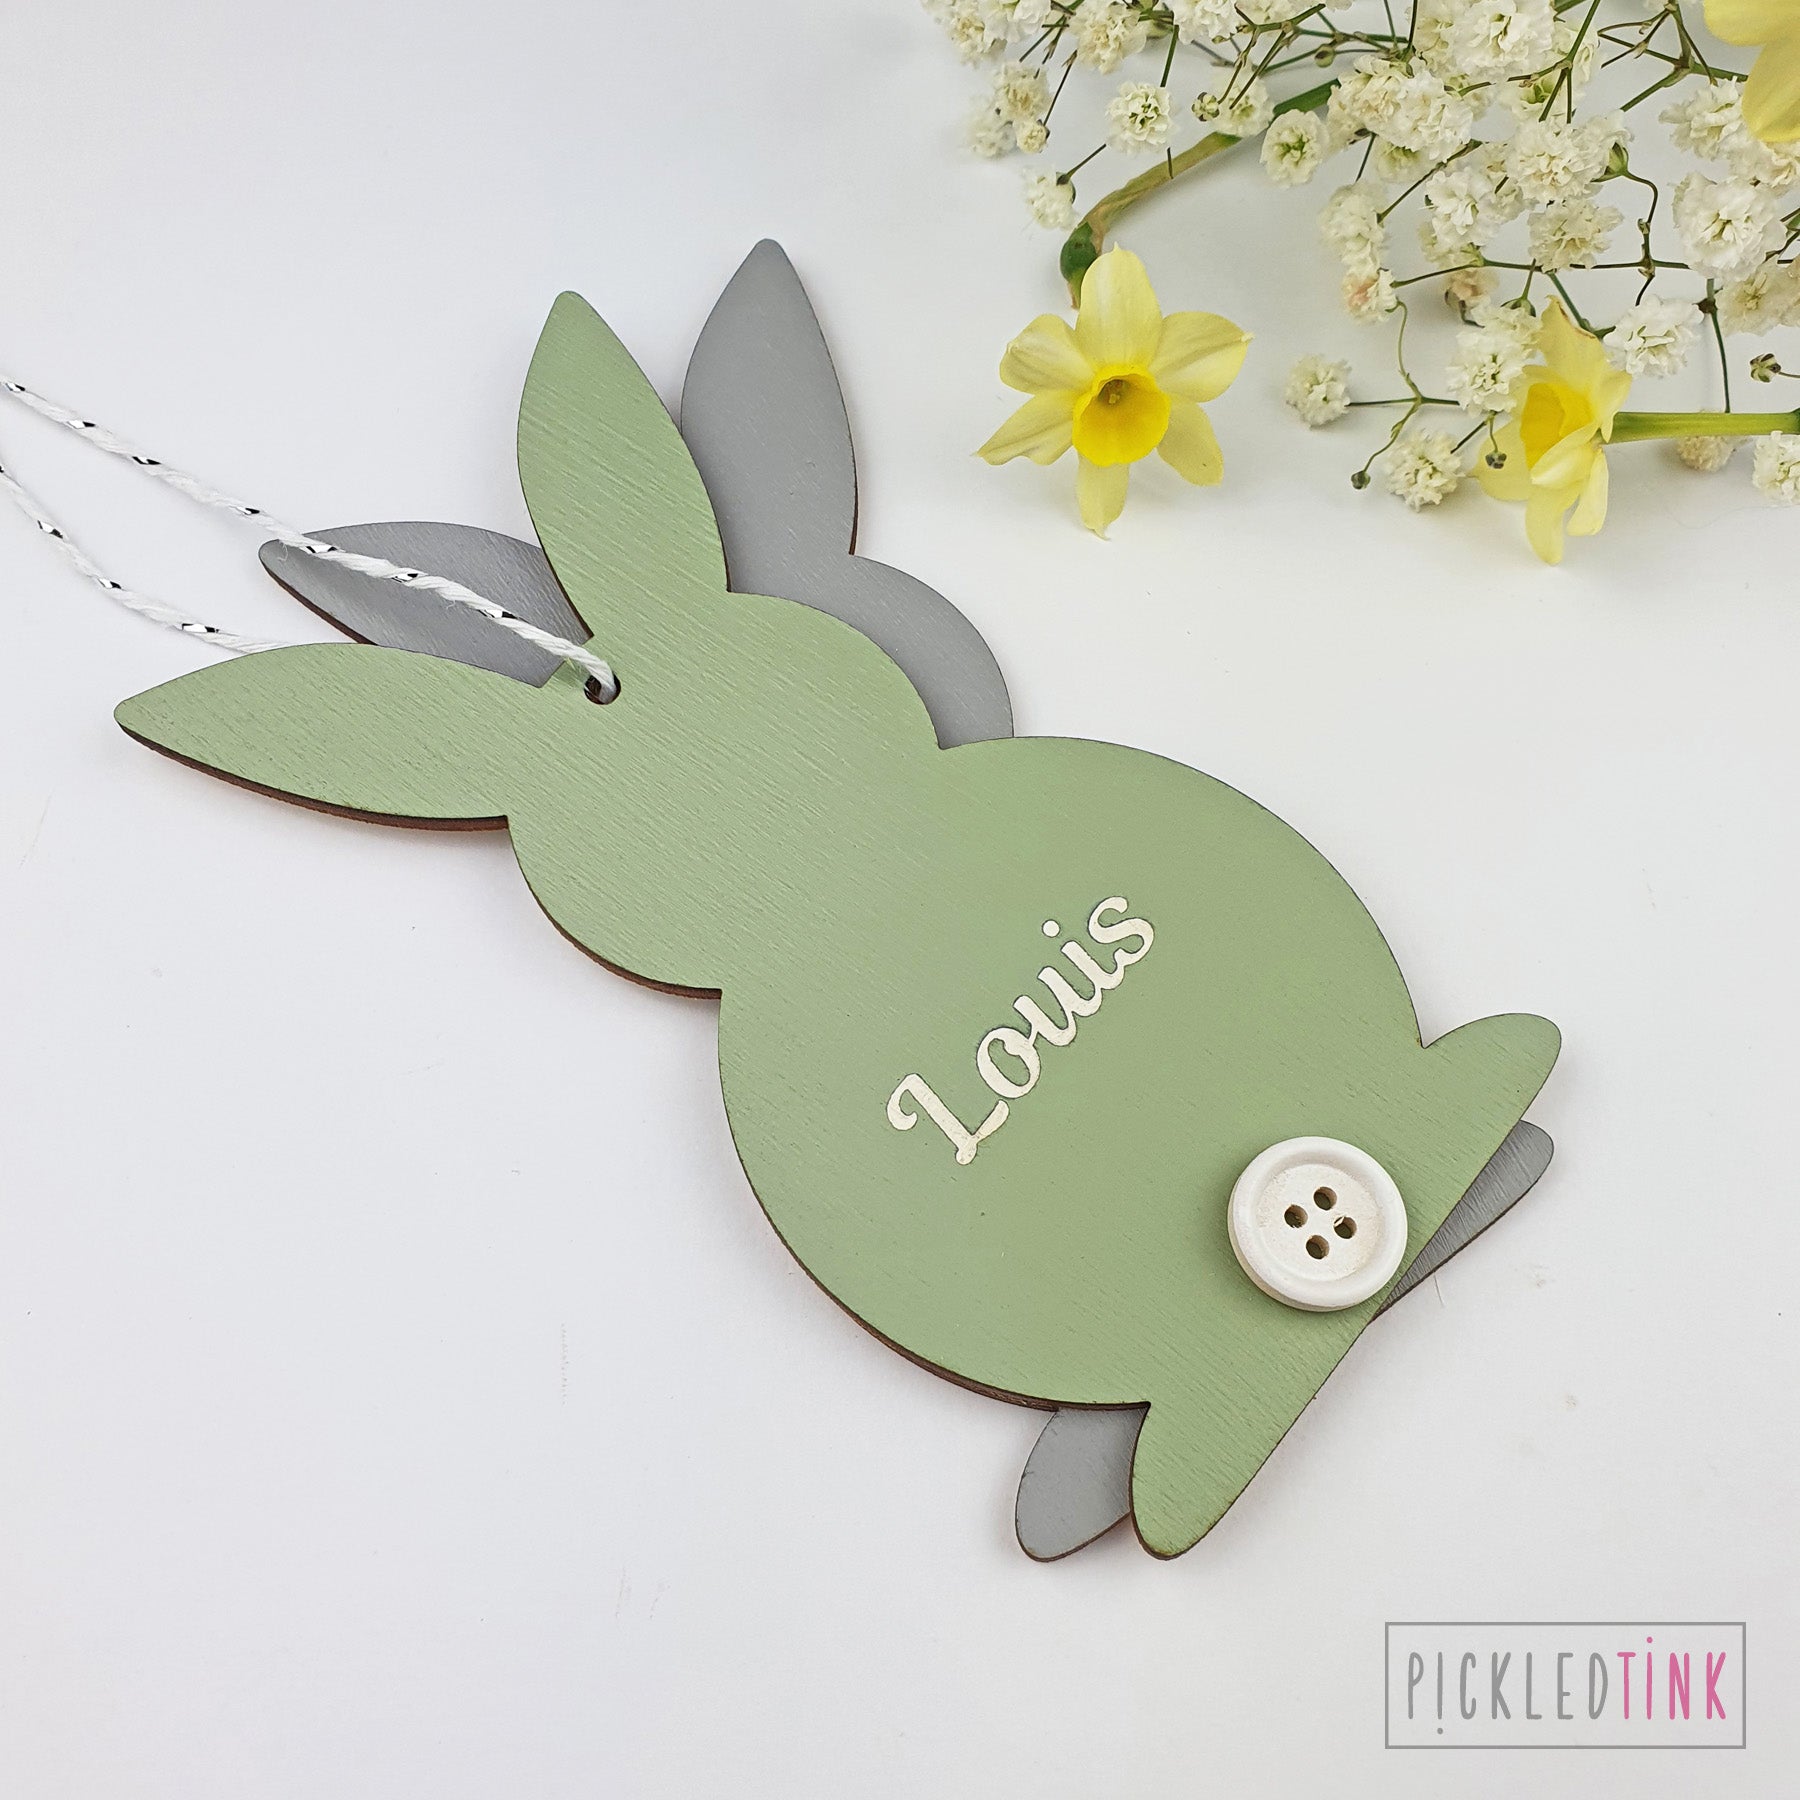 Hanging Easter Bunny Decoration